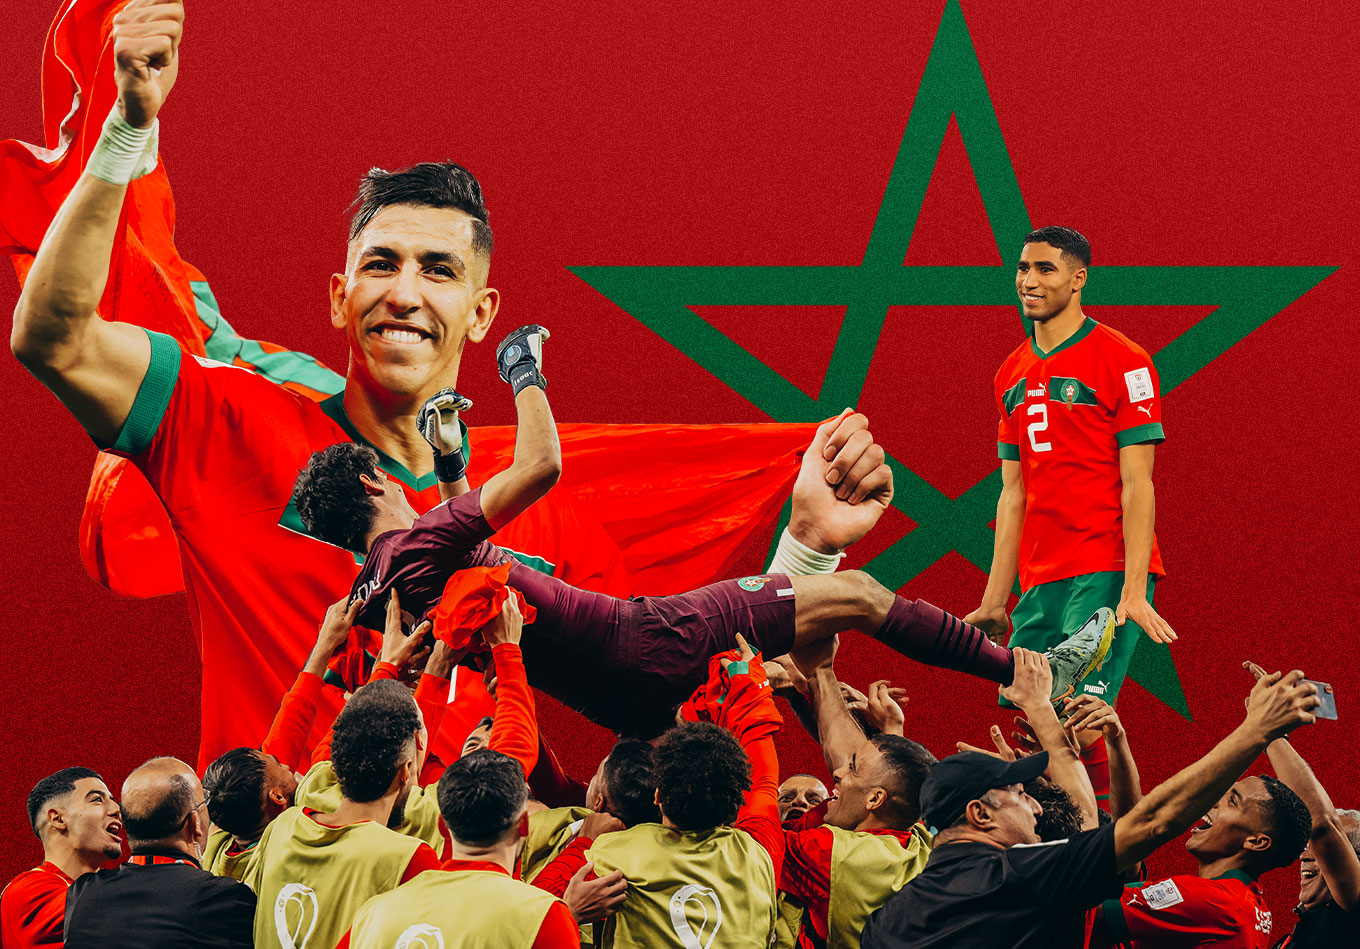 The Moroccan National Team